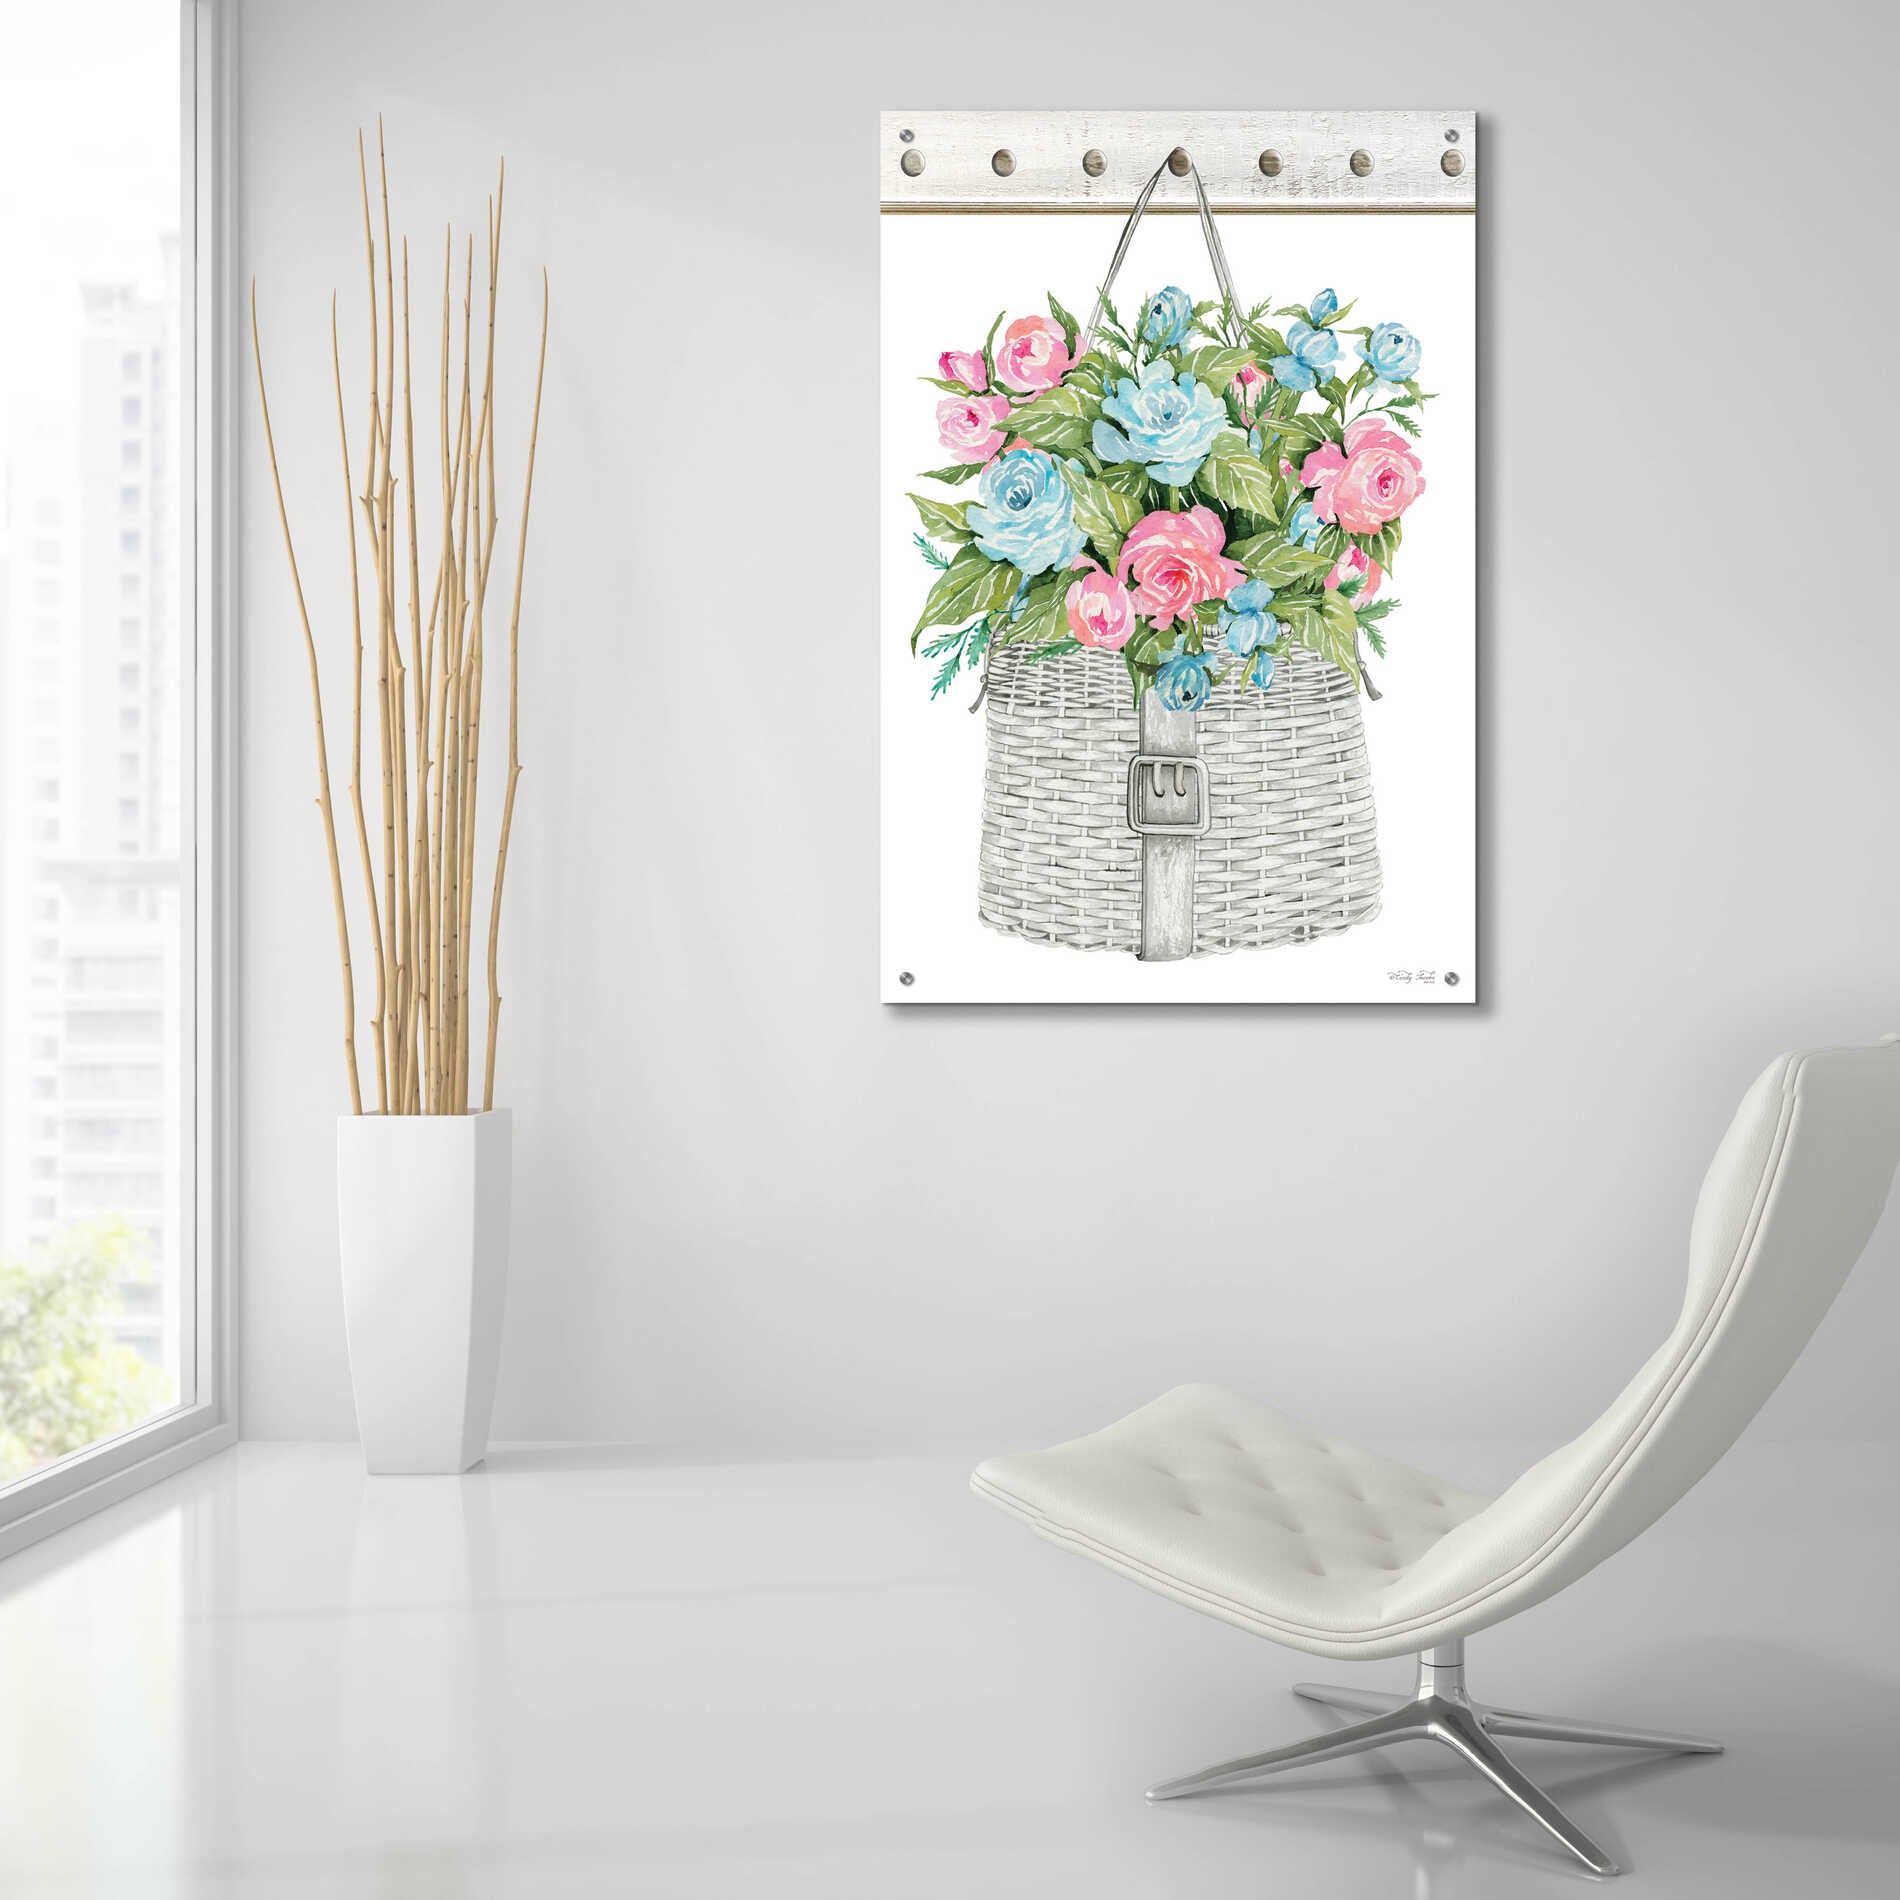 Epic Art 'Floral Pop I' by Cindy Jacobs, Acrylic Glass Wall Art,24x36